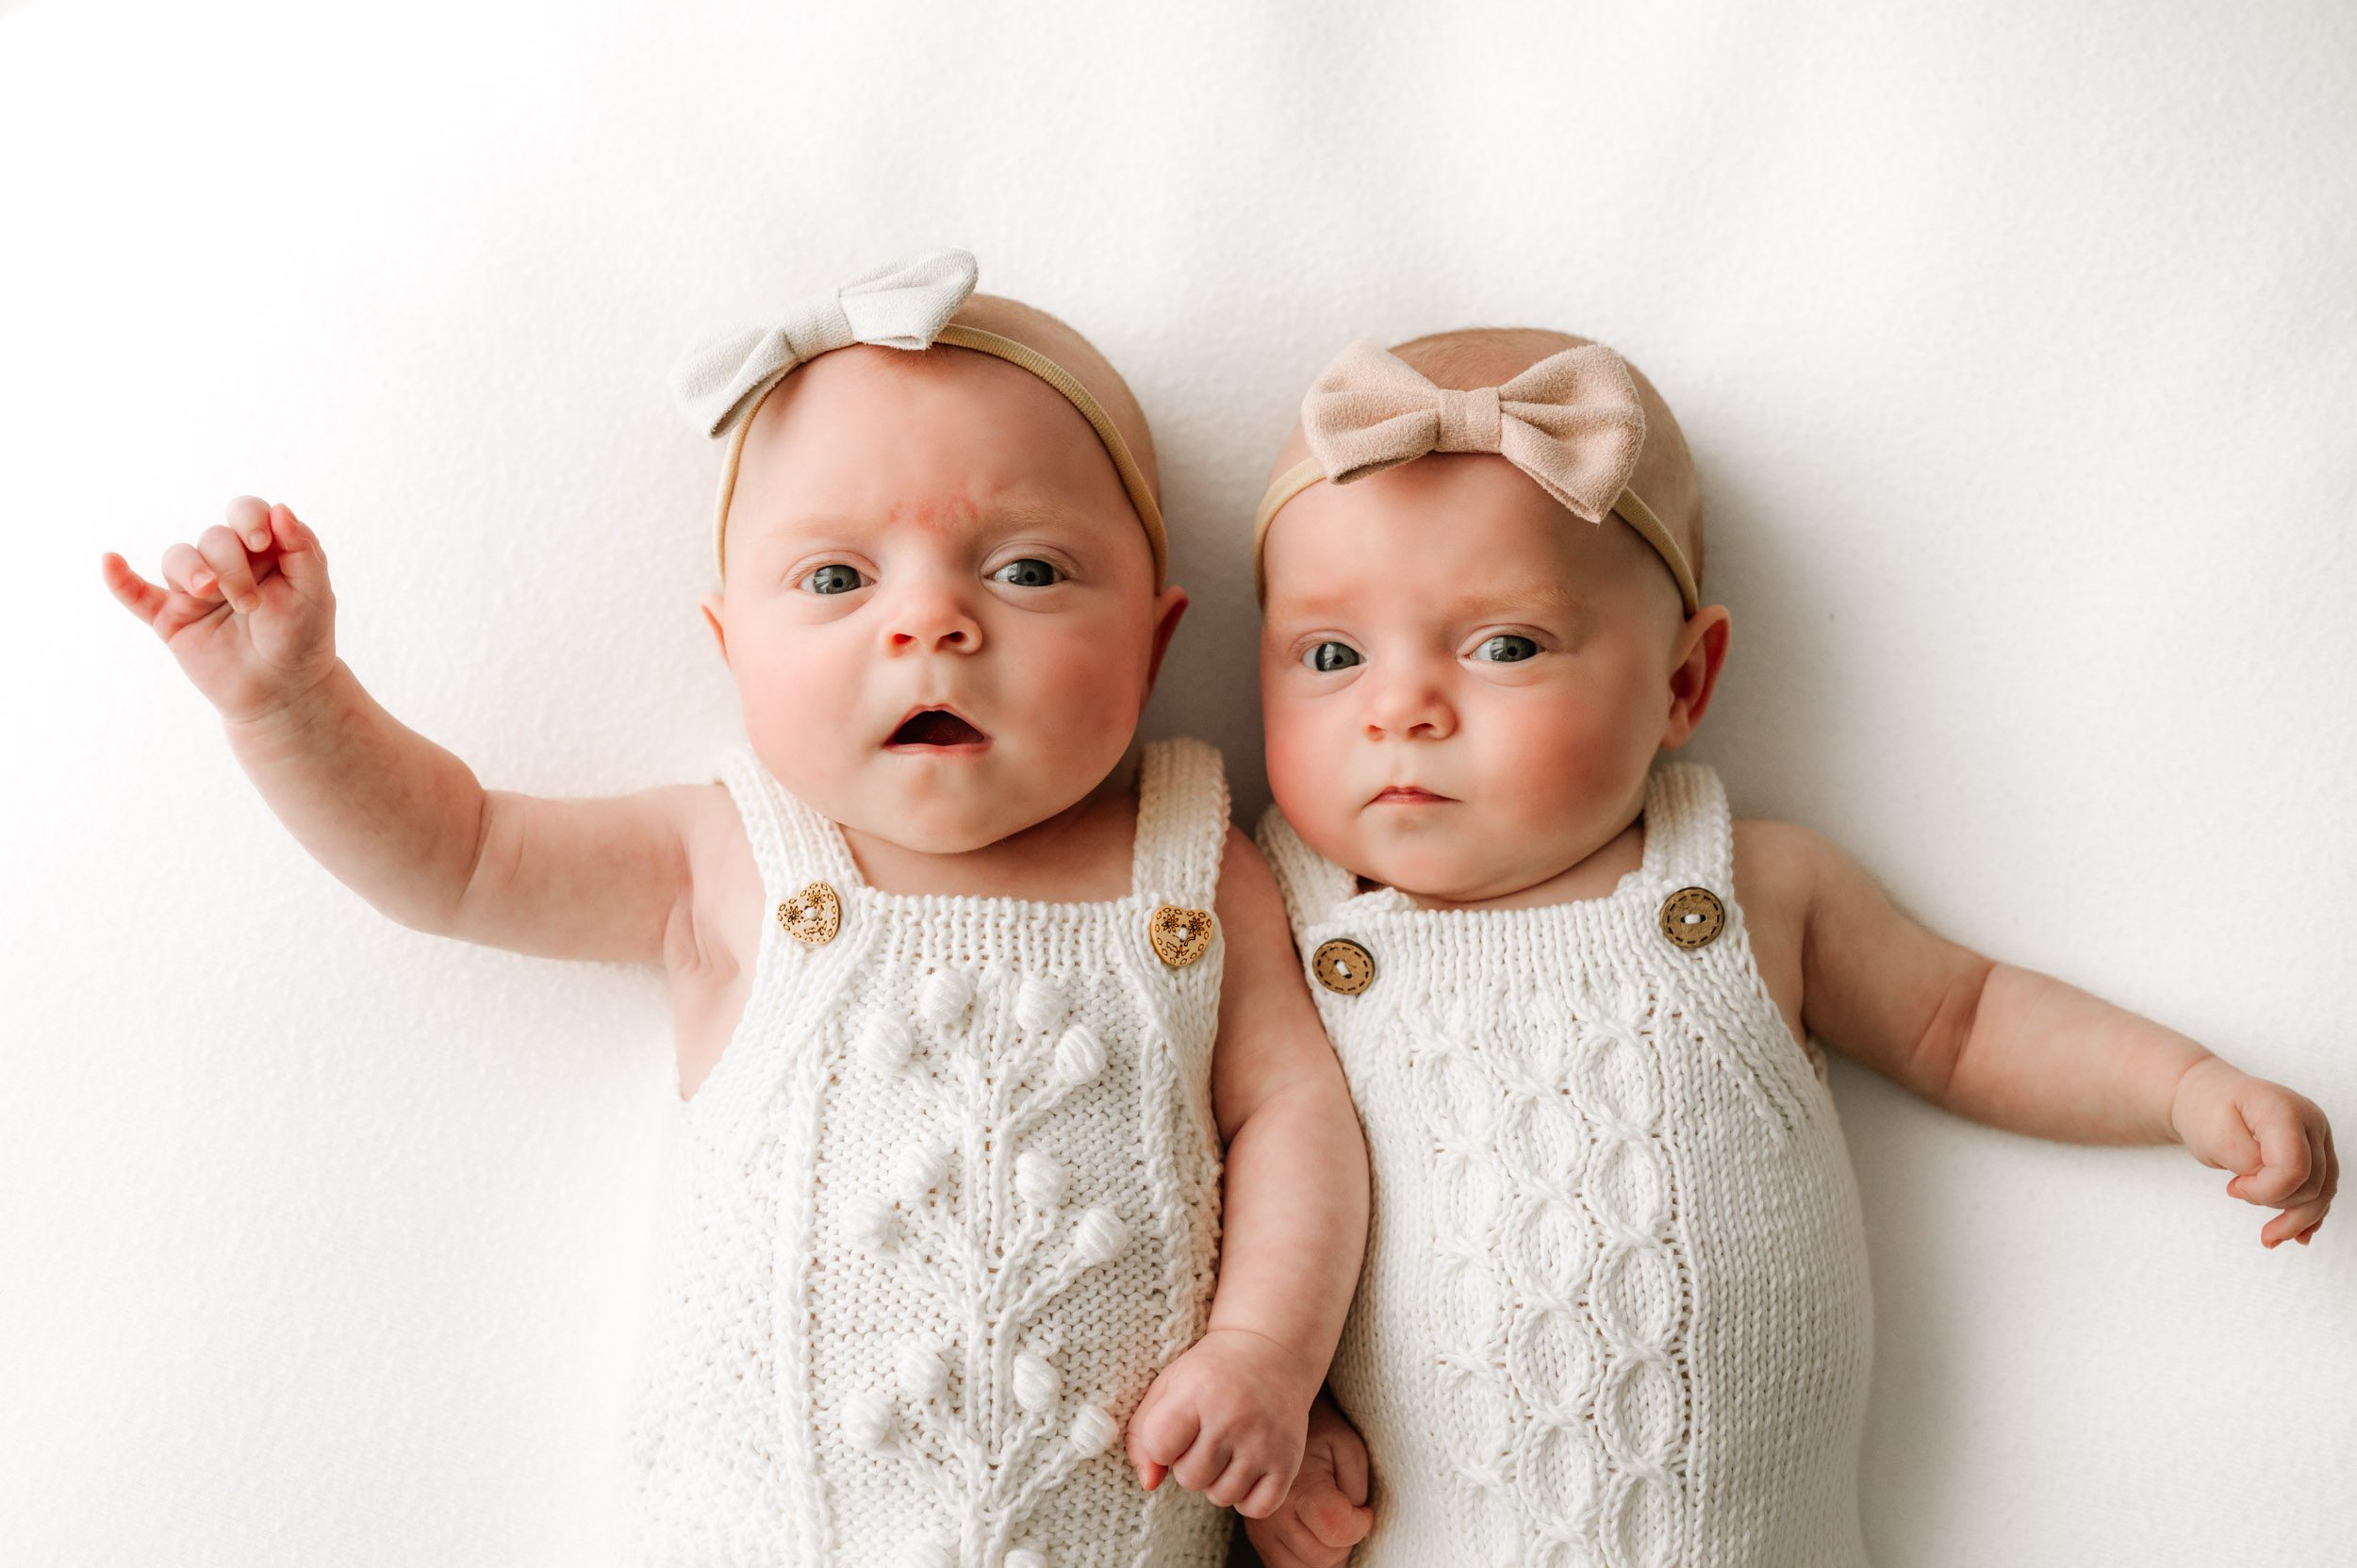 twin baby girls wearing white knit rompers and laying on a white backdrop looking directly at the camera during a newborn photoshoot